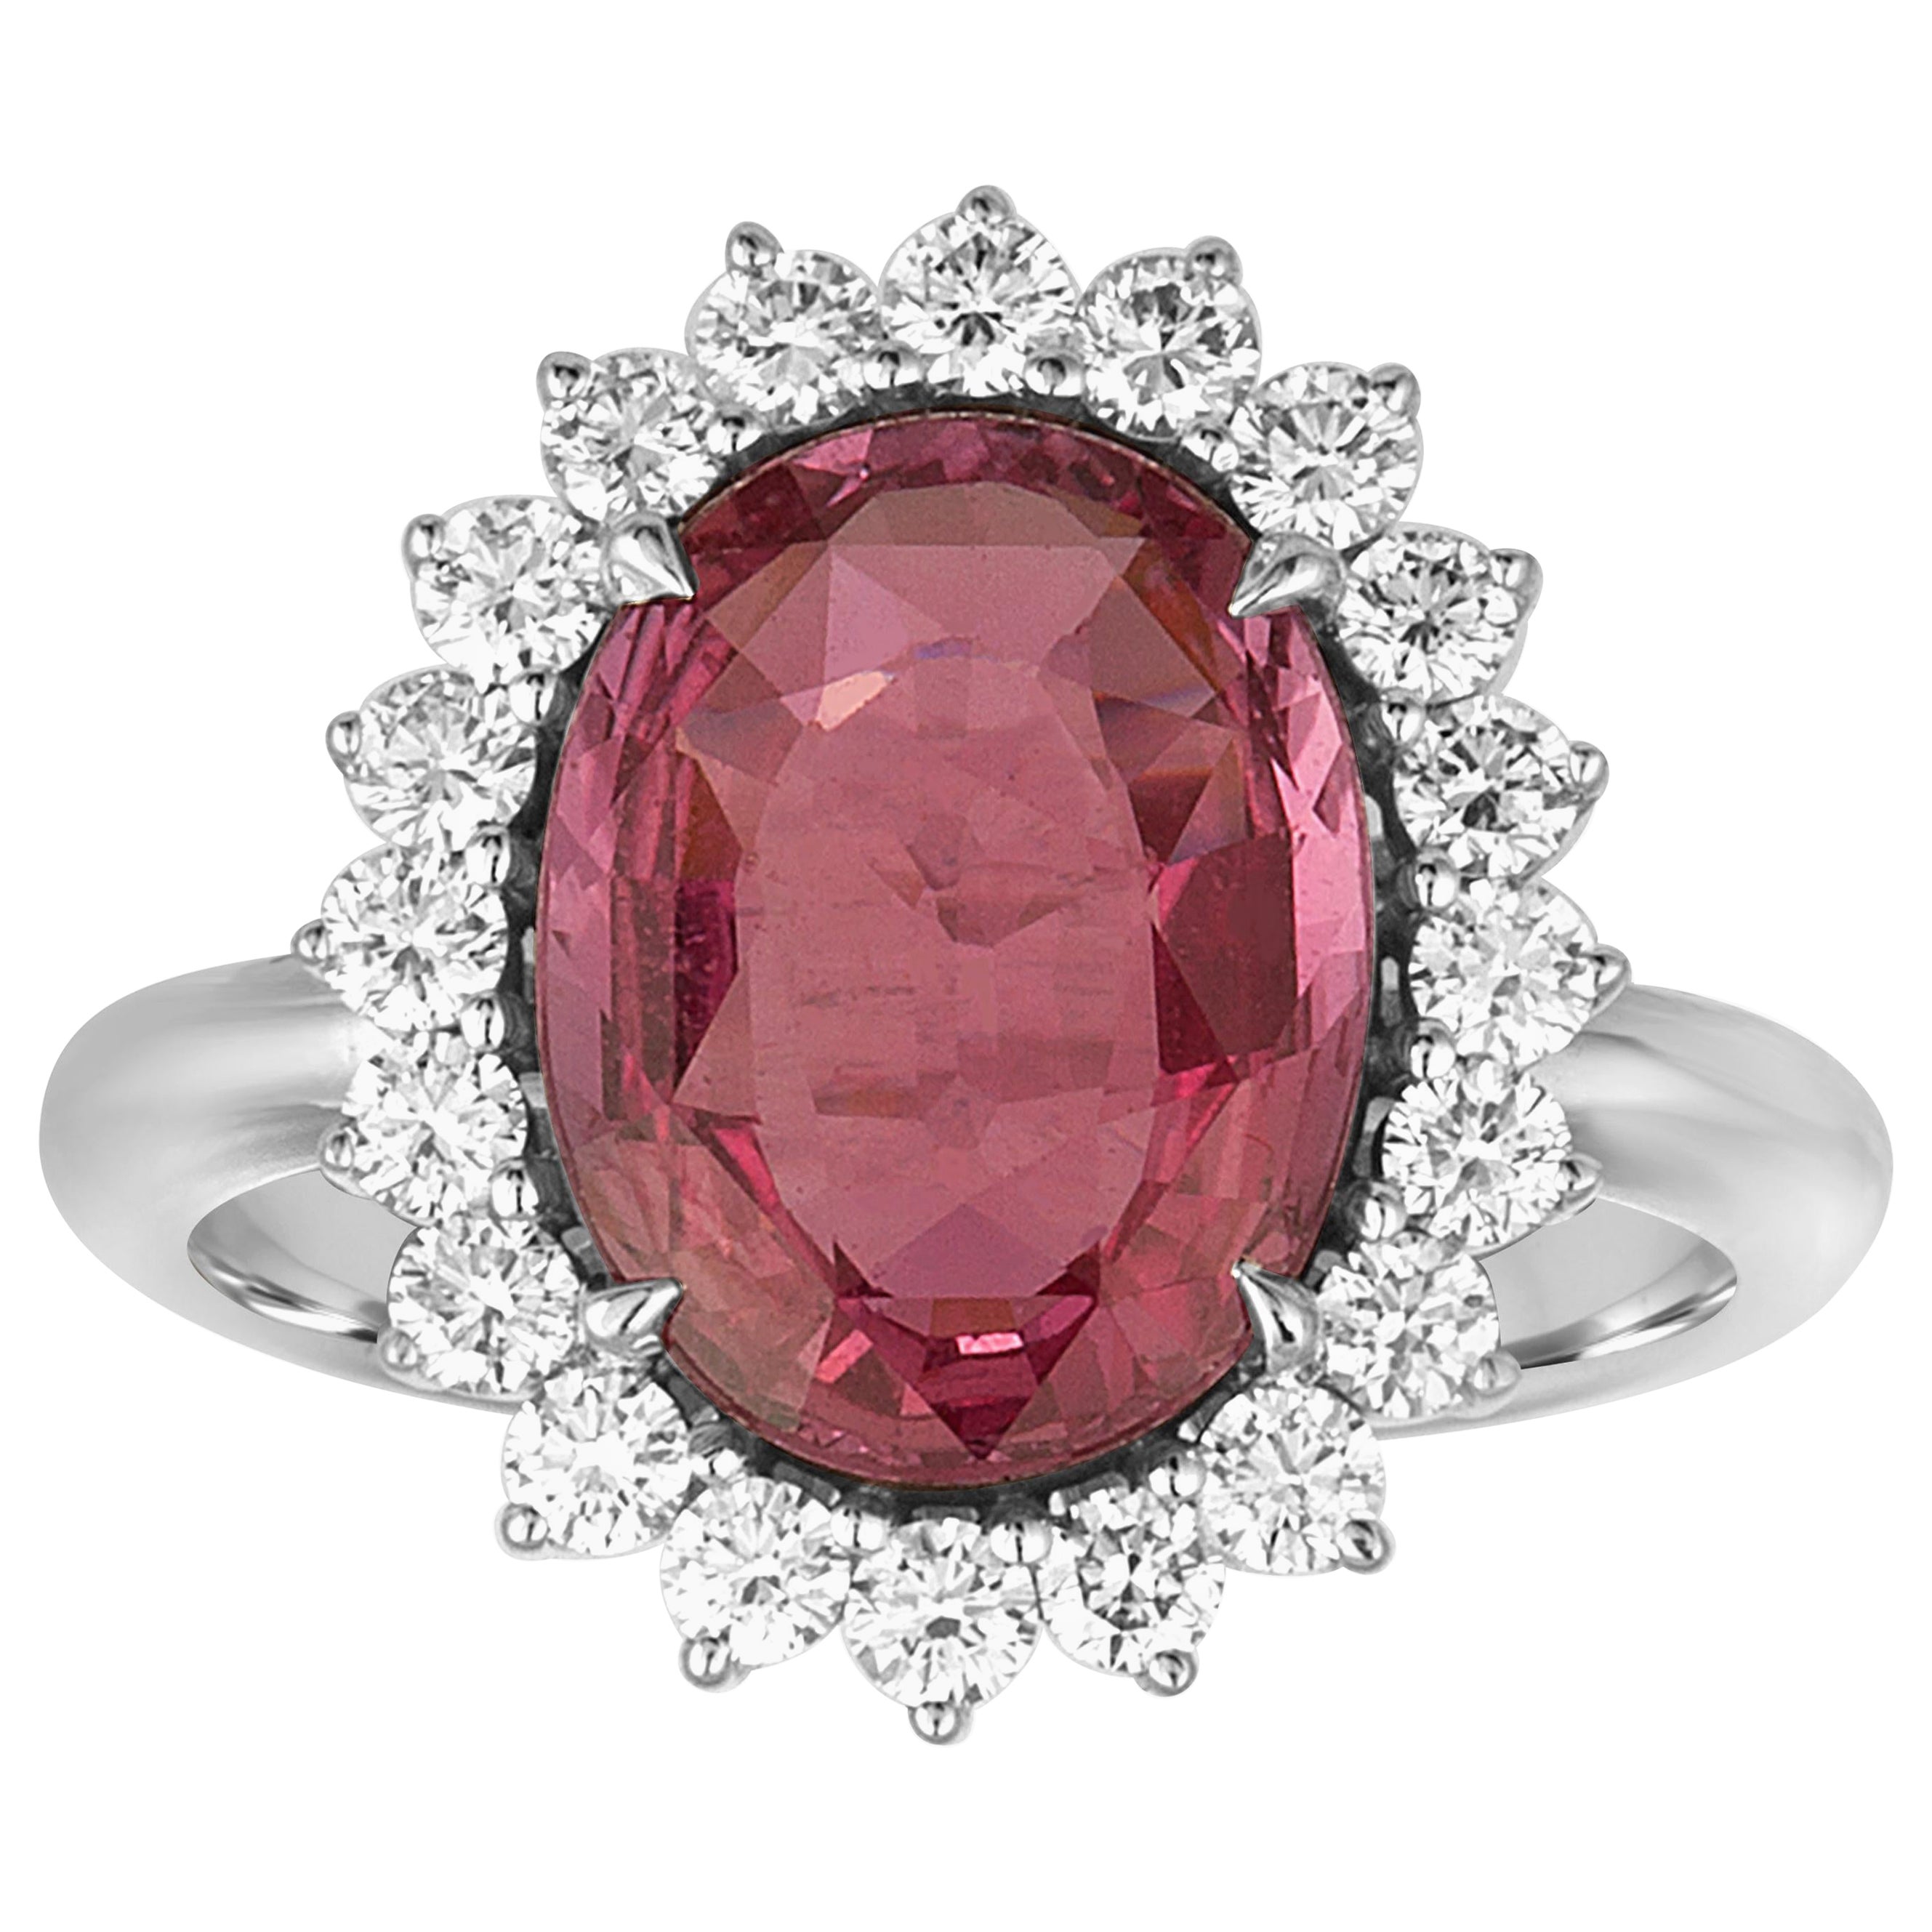 AGL Certified 4.06 Carat Oval Pink Sapphire Diamond Gold Ring For Sale